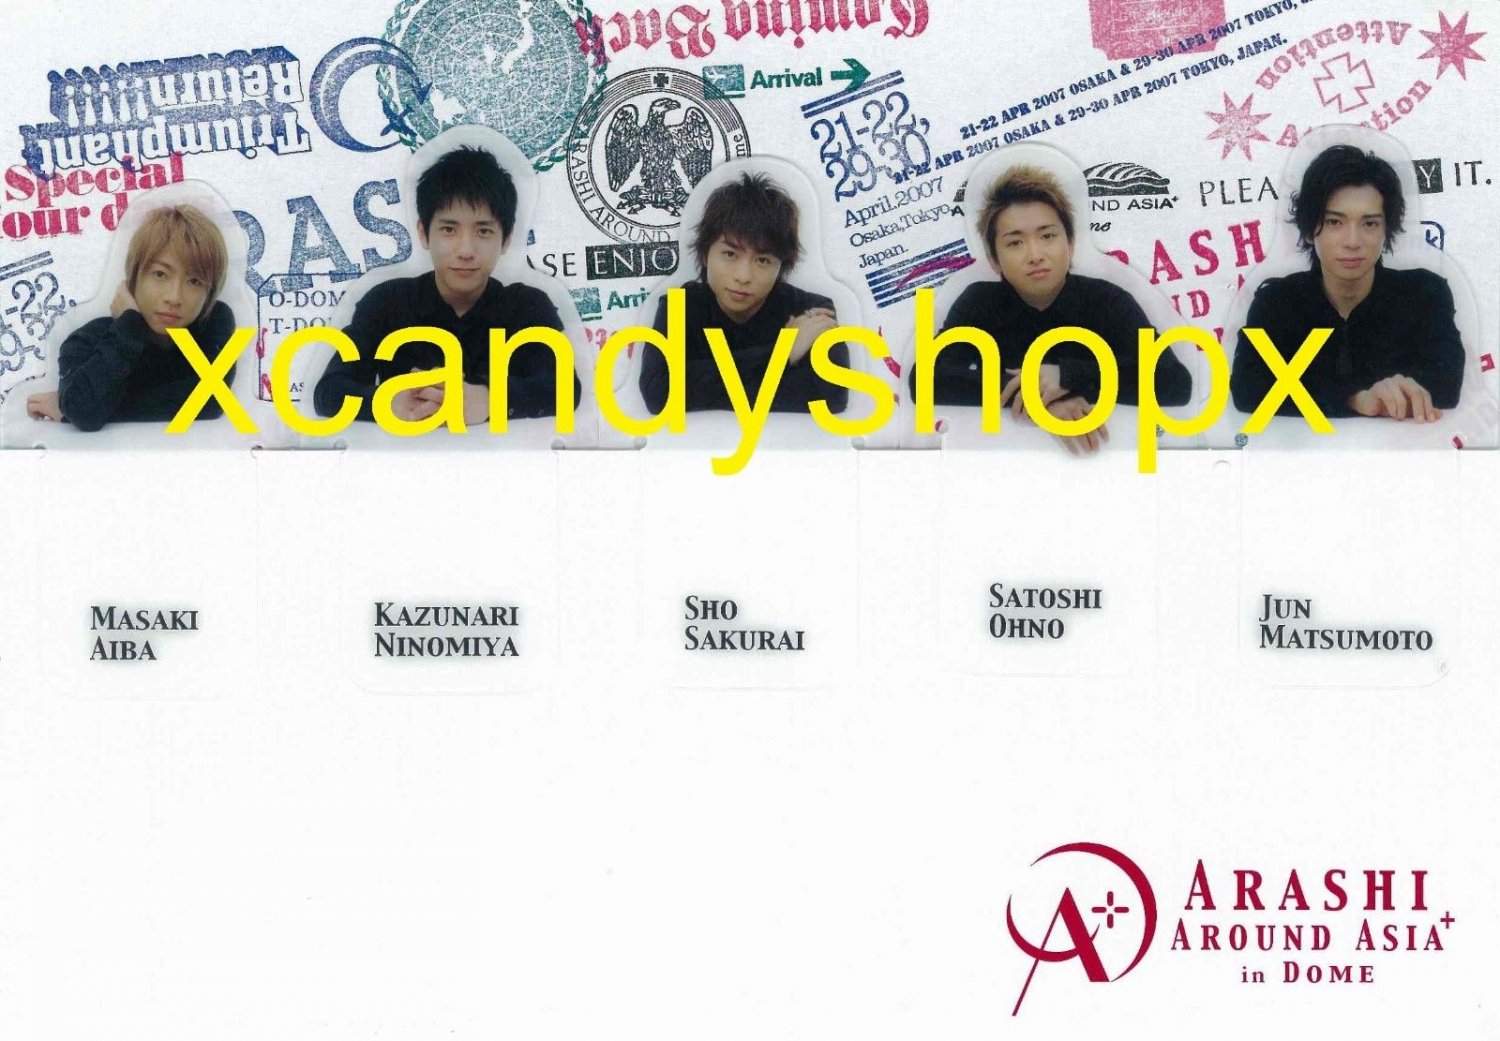 Japan ARASHI Around Asia in Dome 2007 official bookmark set